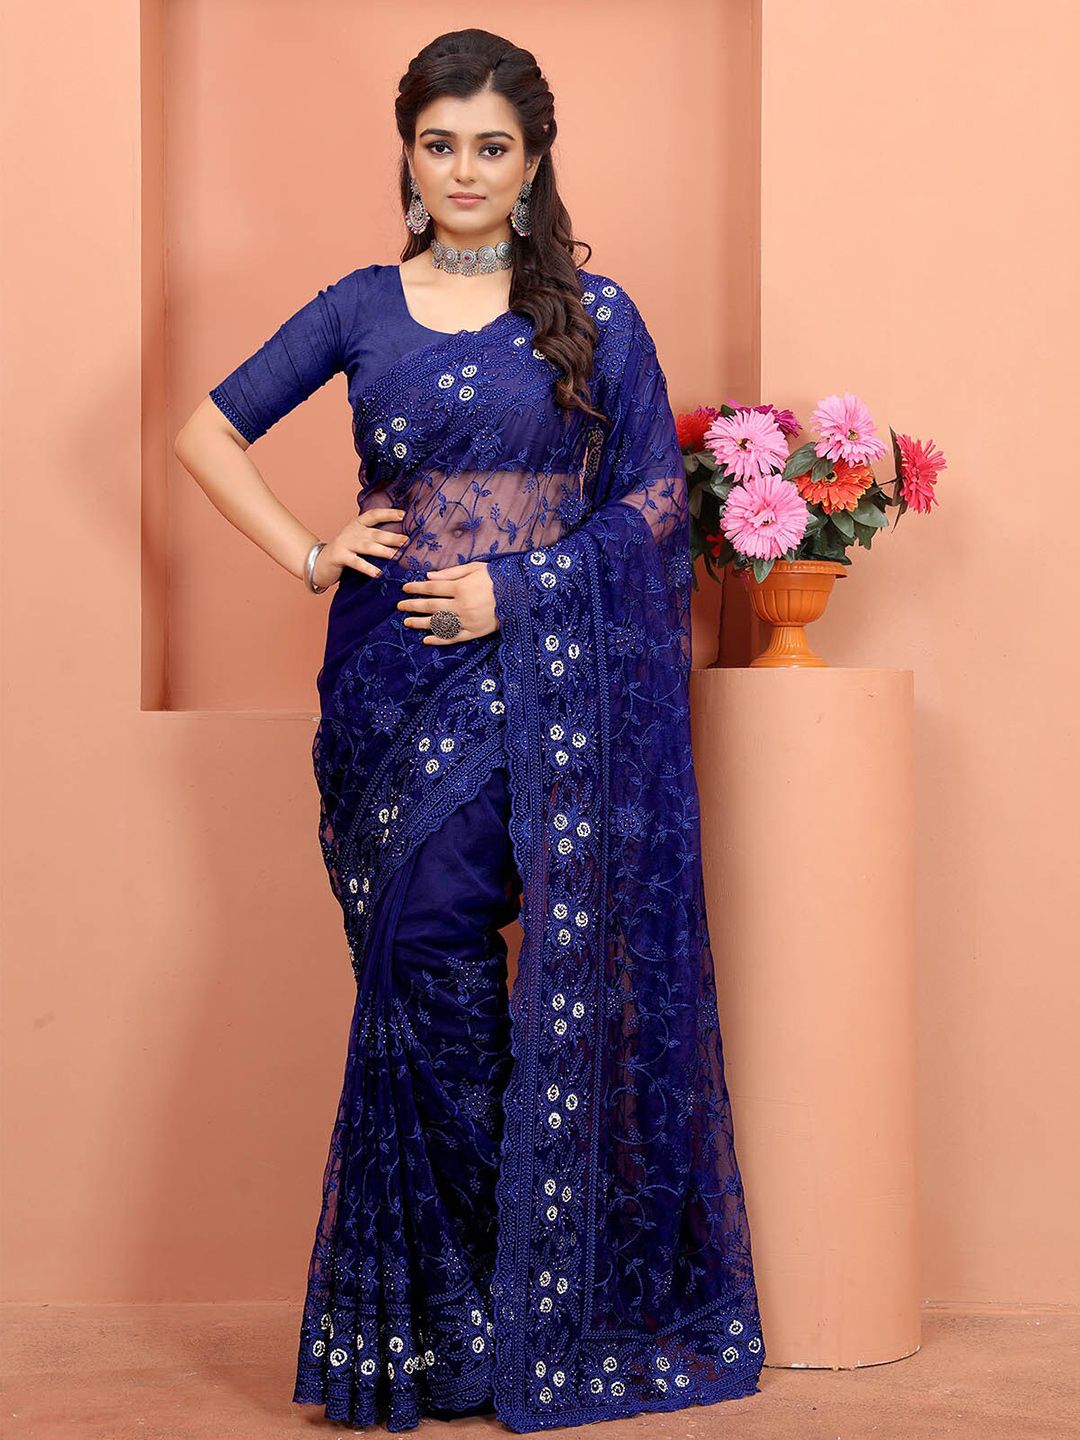 ODETTE Blue Floral Beads and Stones Net Saree Price in India